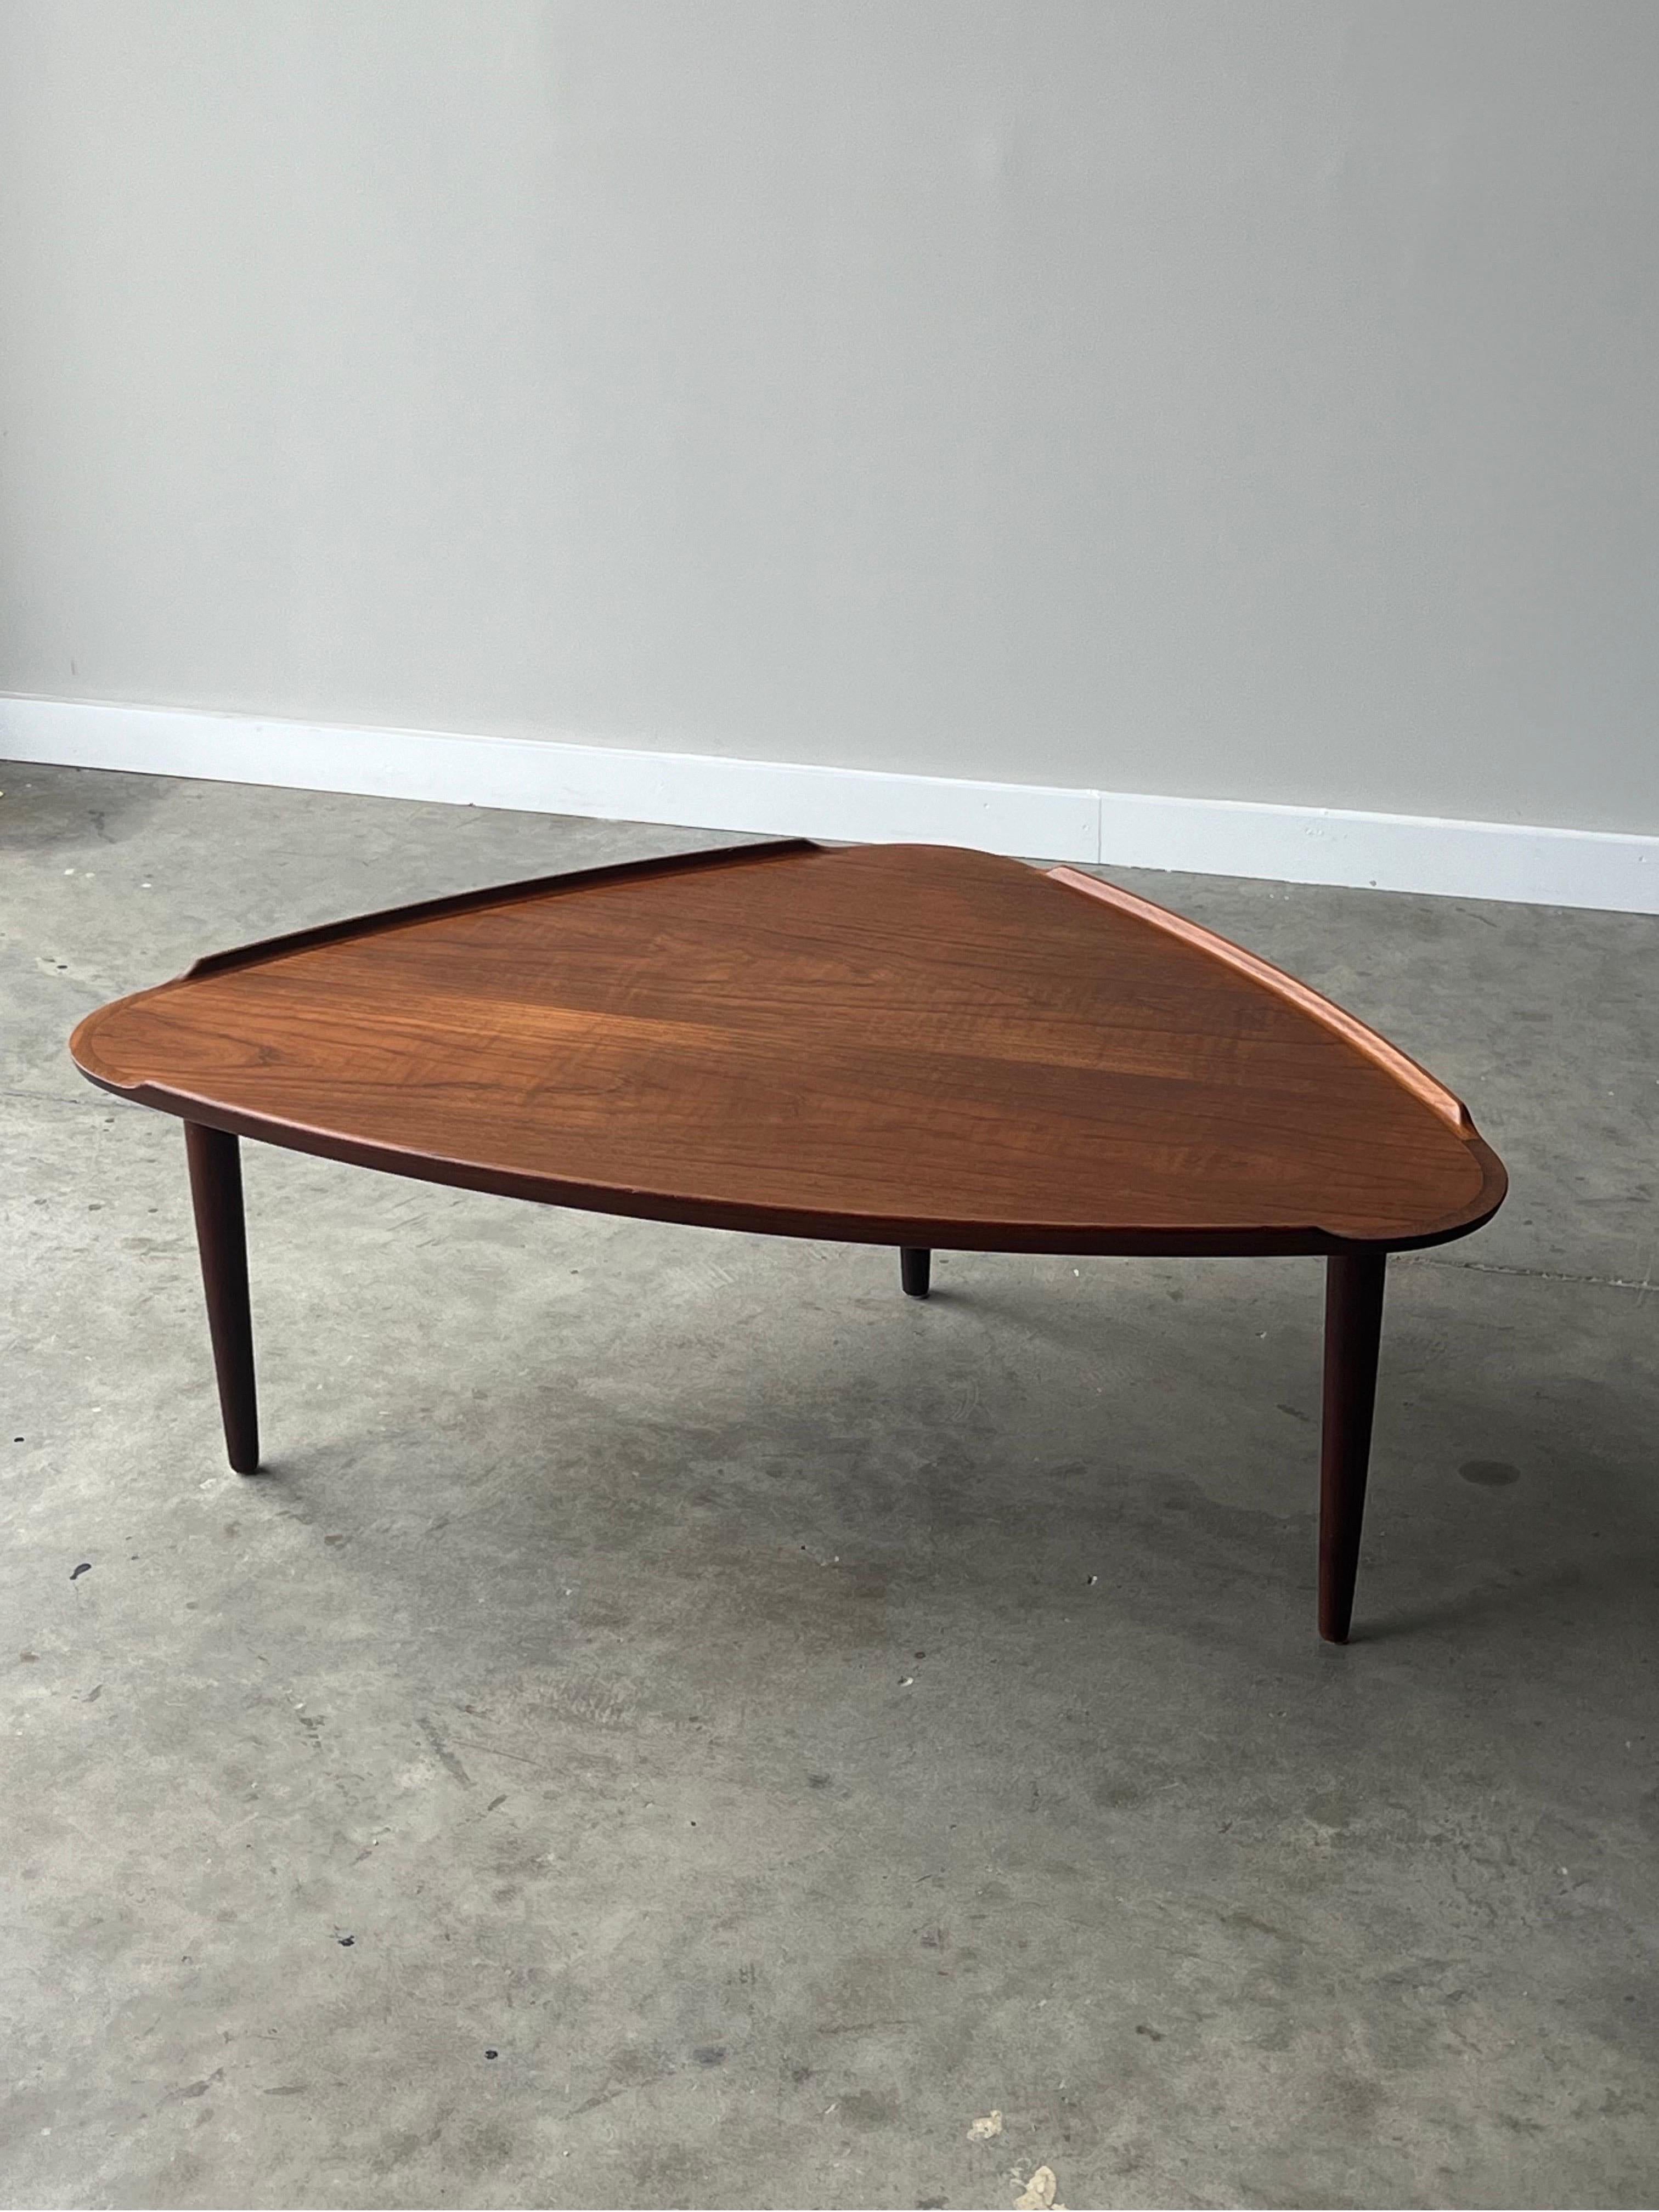 Spectacular 1960’s Danish modern team tripod triangular coffee table designed by Aakjaer Jorgensen. Guitar pick shape with carved lip edges. Three round tapered teak legs. Reminiscent of the designs of Greta Jalk and Finn Juhl. Finely crafted and a